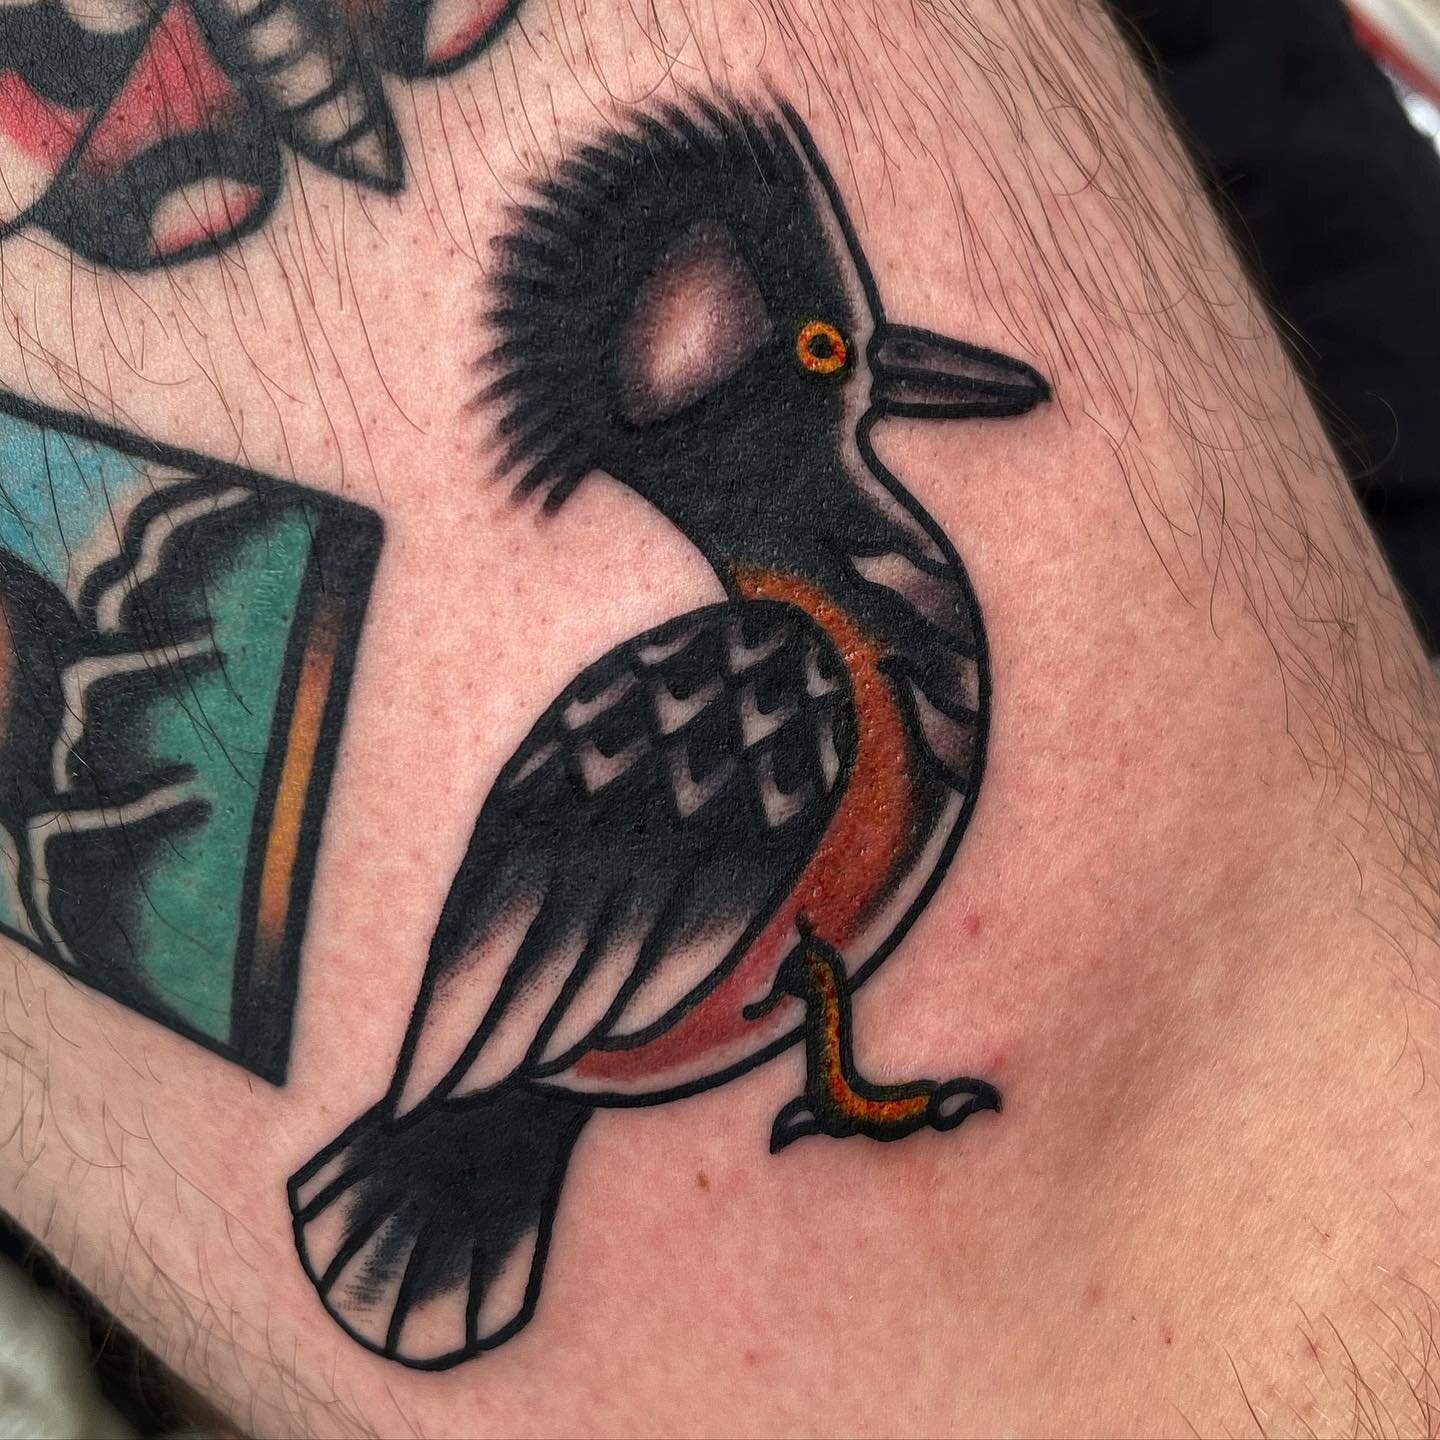 My afternoon appointment for today cancelled so email me dr.crimeboy@gmail with &ldquo;today&rdquo; in the memo if you wanna come in now ! Thanks !
#traditionaltattoo #tradworkers #americantraditional #ducktattoo #bright_and_bold #bostontattoo #bosto